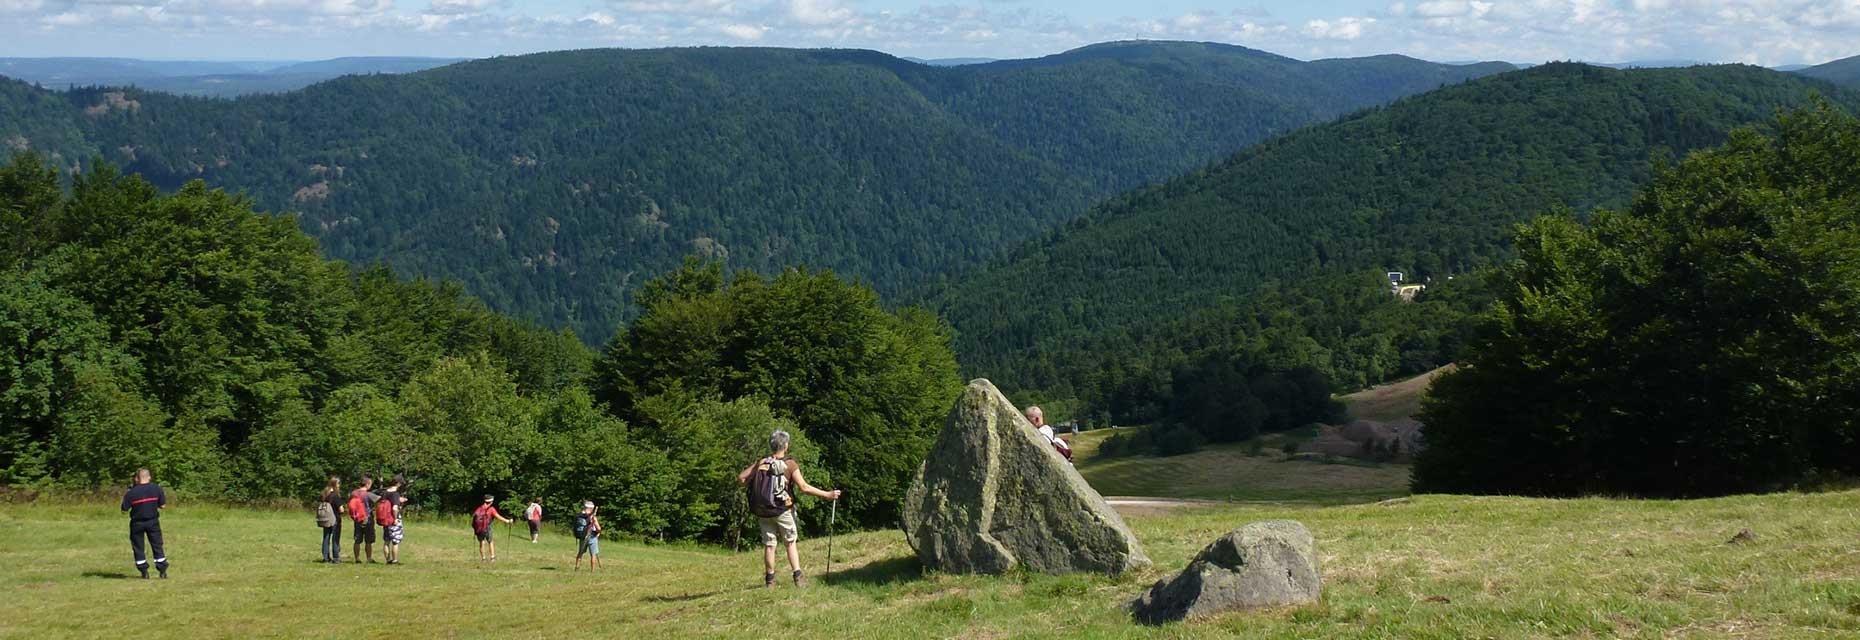 Hiking in the Southern Vosges, near the Campsite Les Ballastières